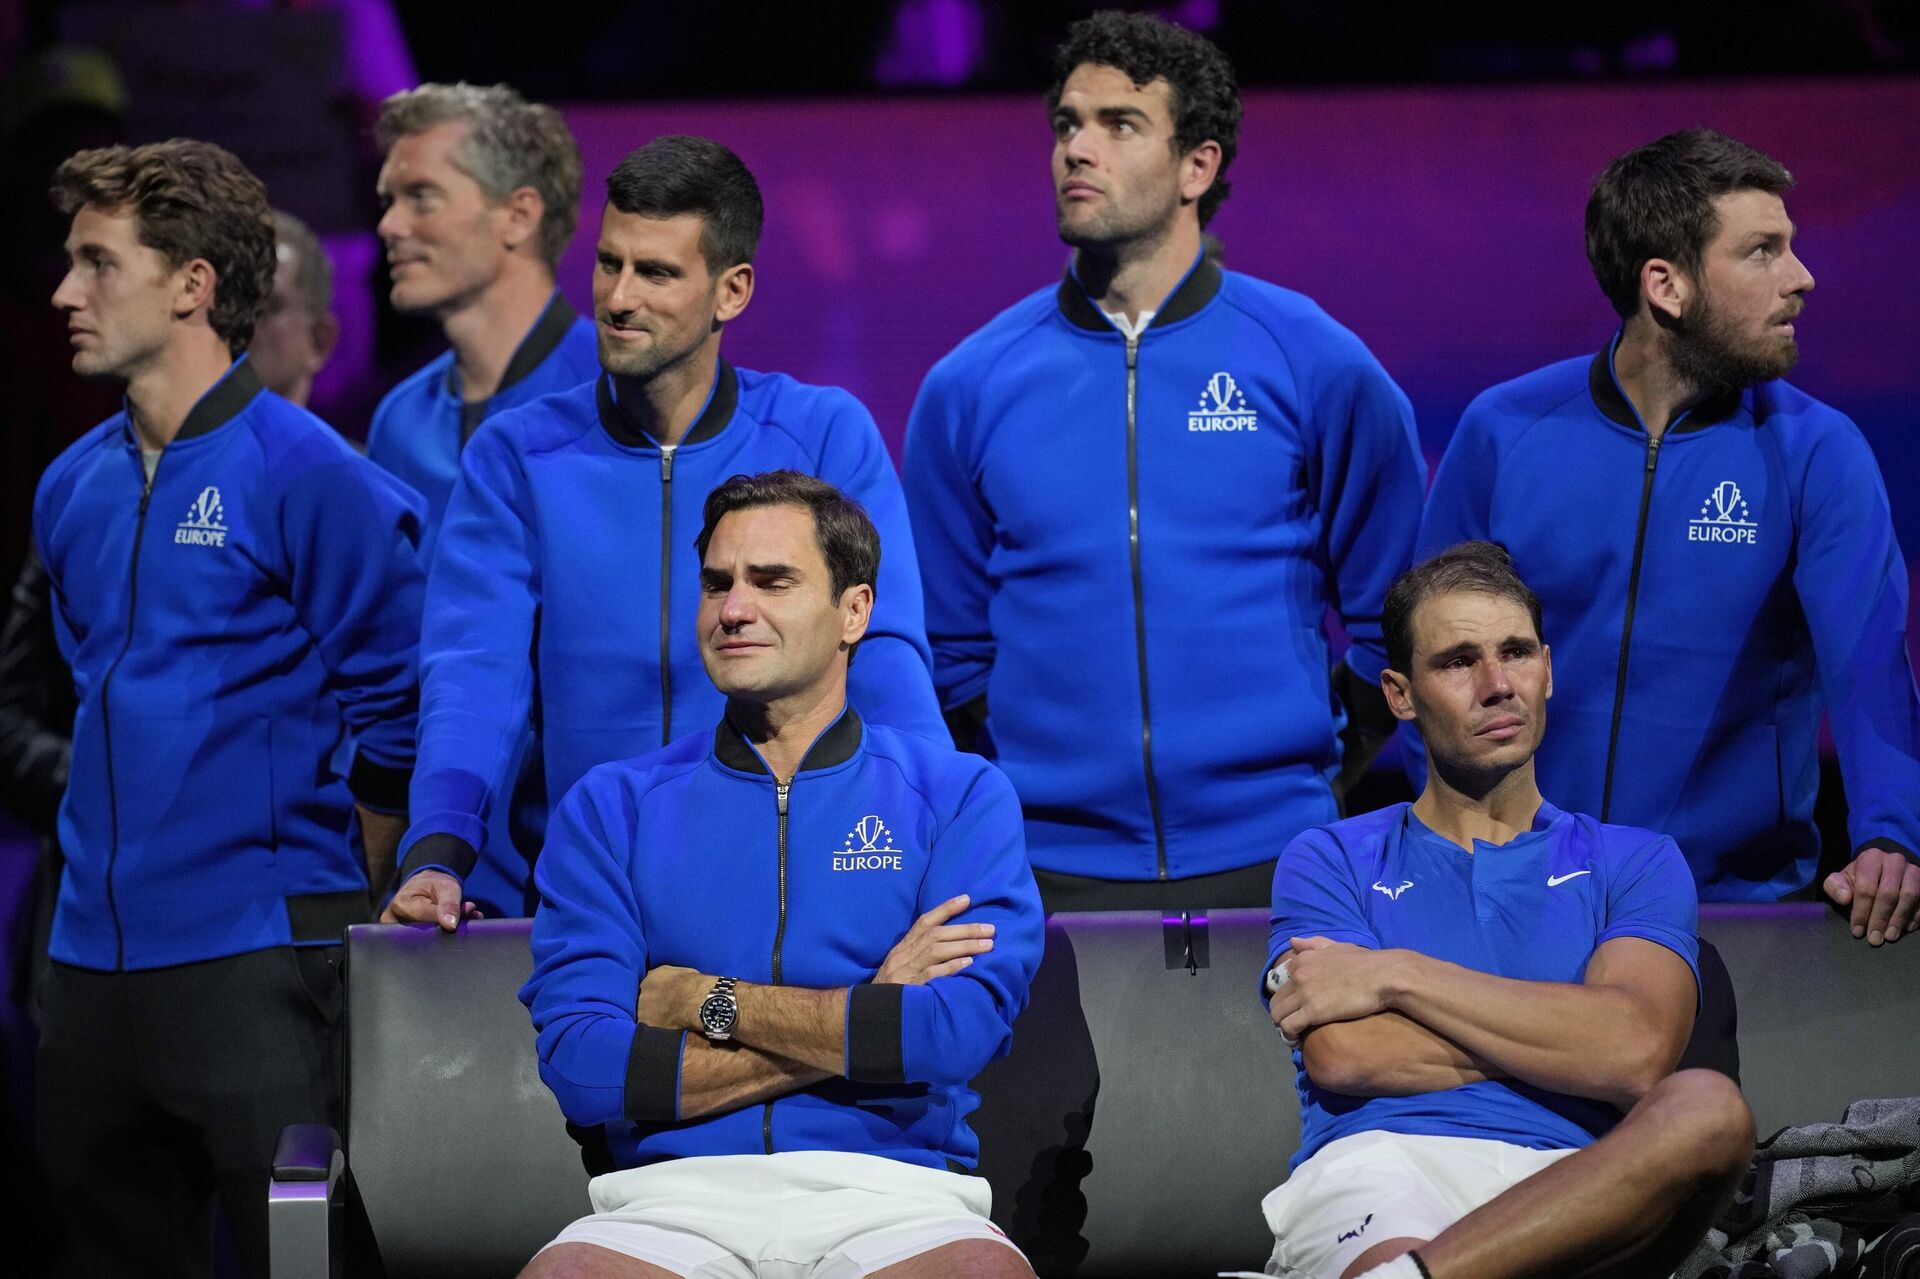 An emotional Roger Federer, left, of Team Europe sits alongside his playing partner Rafael Nadal after their Laver Cup doubles match against Team World's Jack Sock and Frances Tiafoe at the O2 arena in London, Friday, Sept. 23, 2022. - Sputnik India, 1920, 30.12.2022